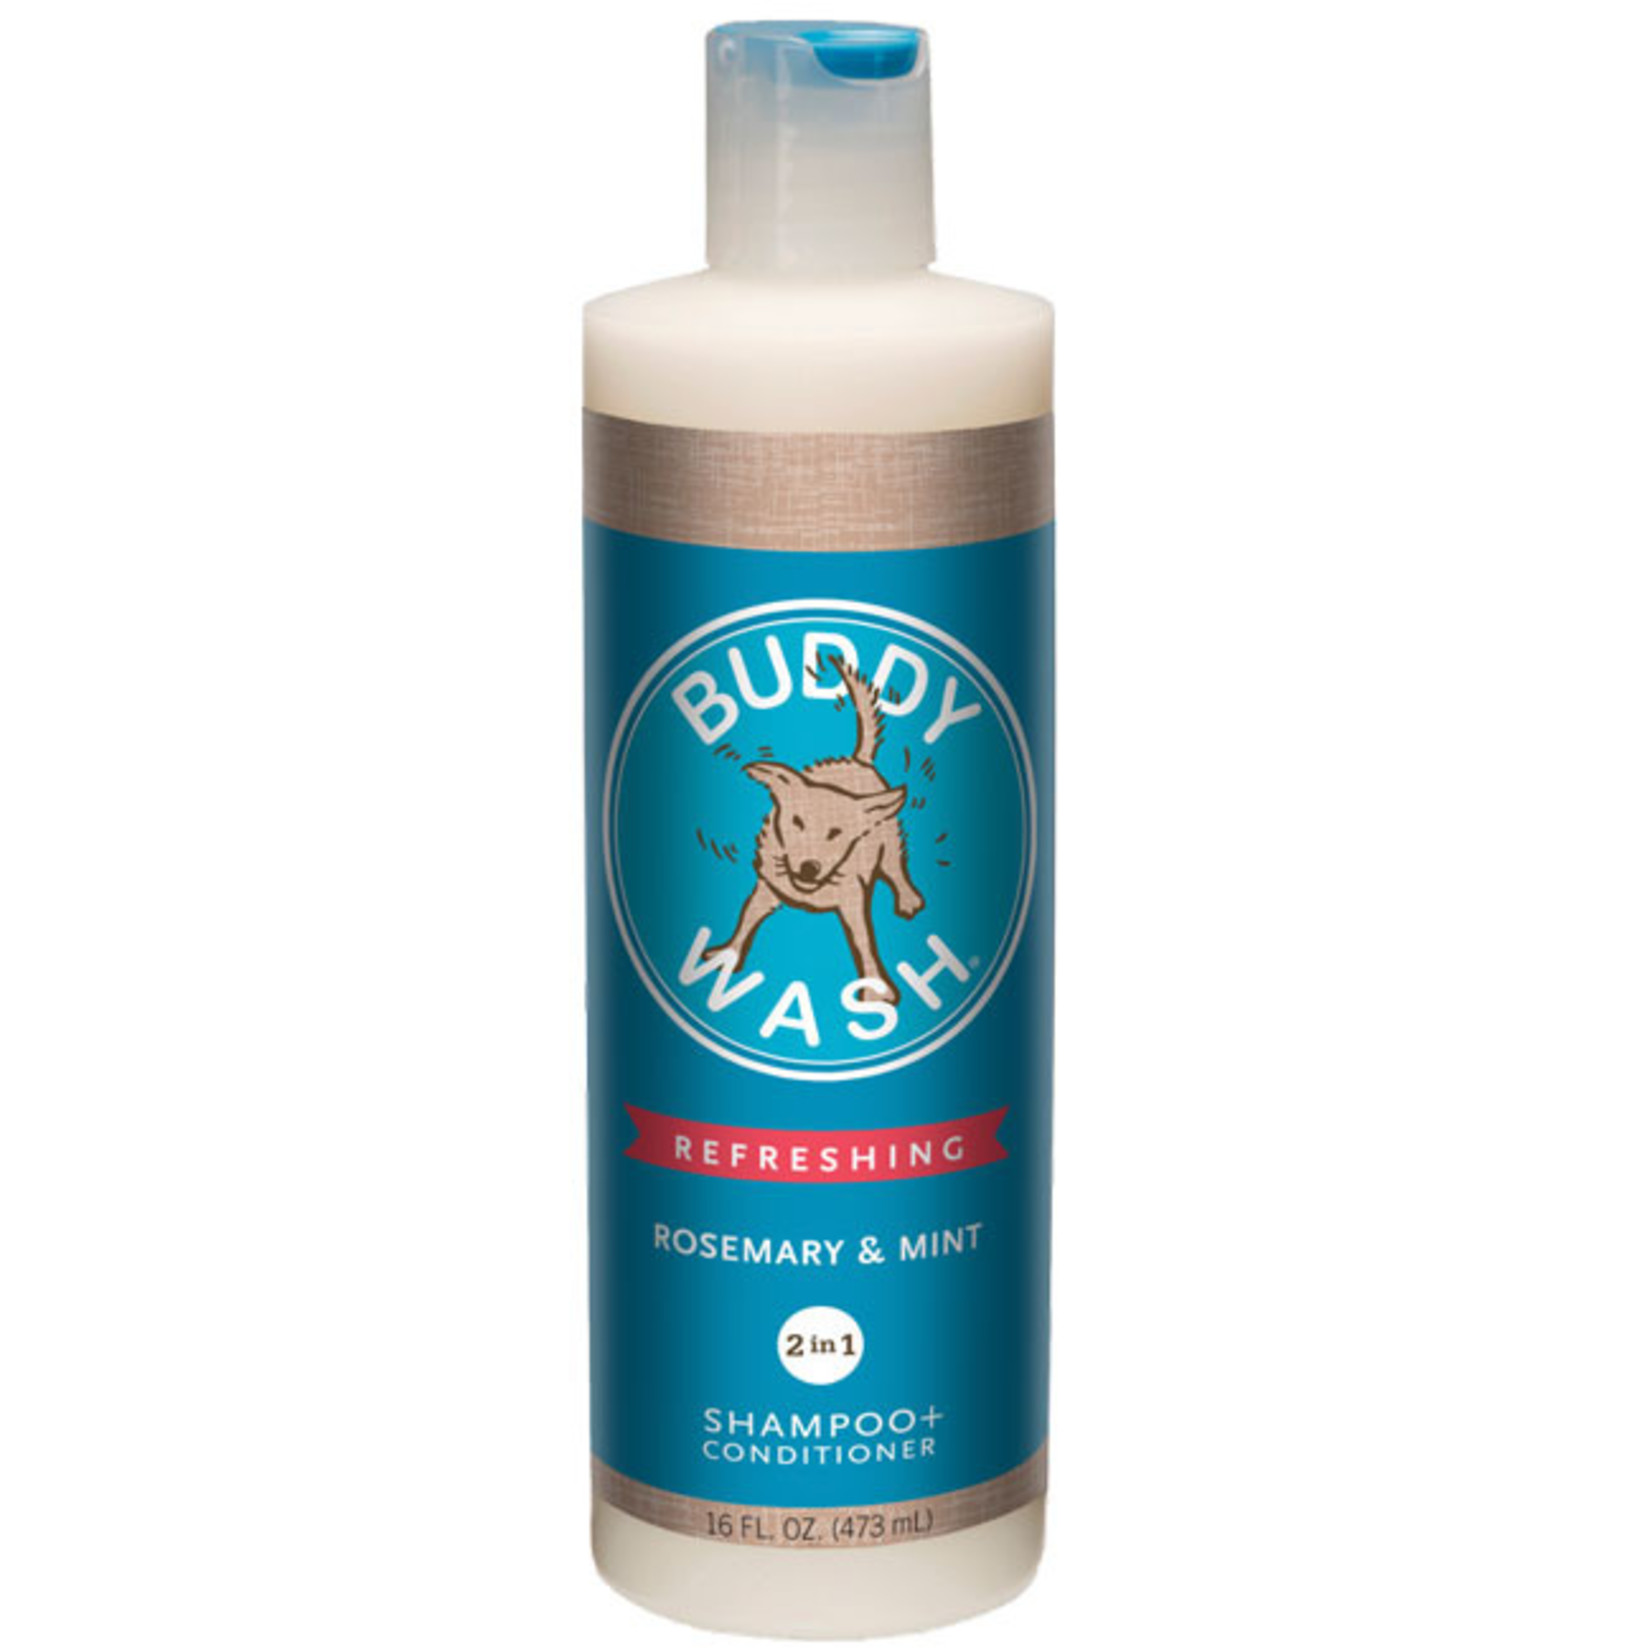 Cloud Star Buddy Wash 2-in-1 Rosemary & Mint Shampoo & Conditioner for Dogs 16oz